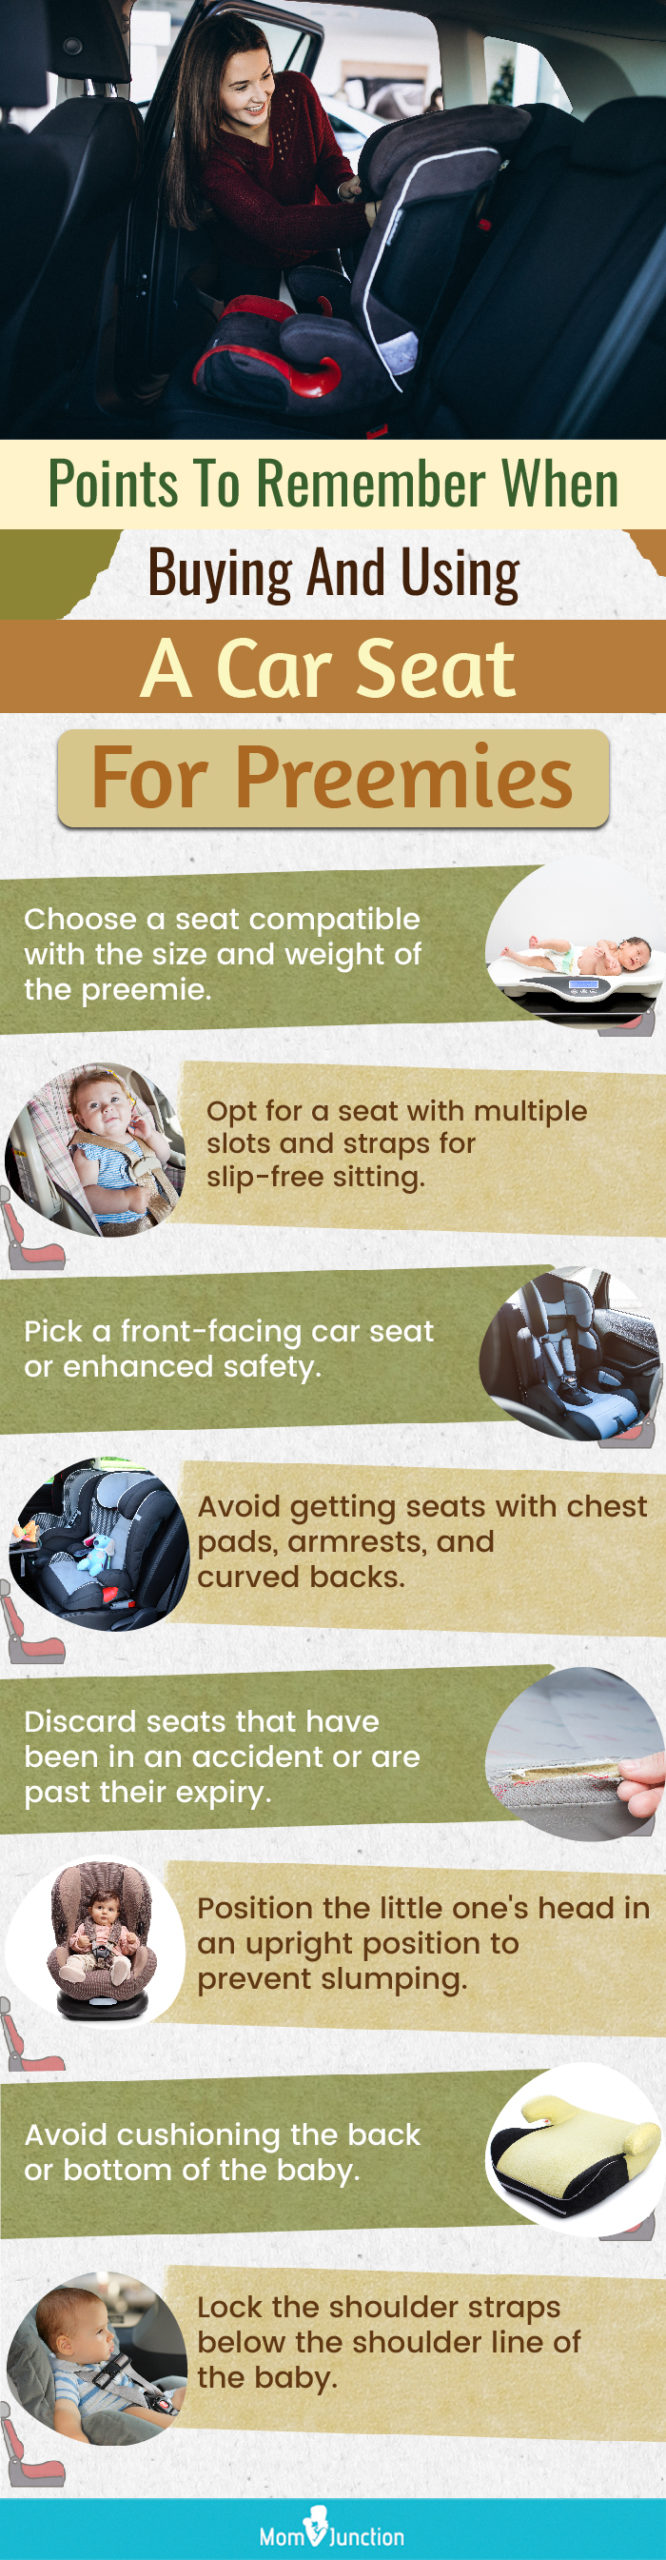 Points To Remember When Buying And Using A Car Seat For Preemies (infographic)